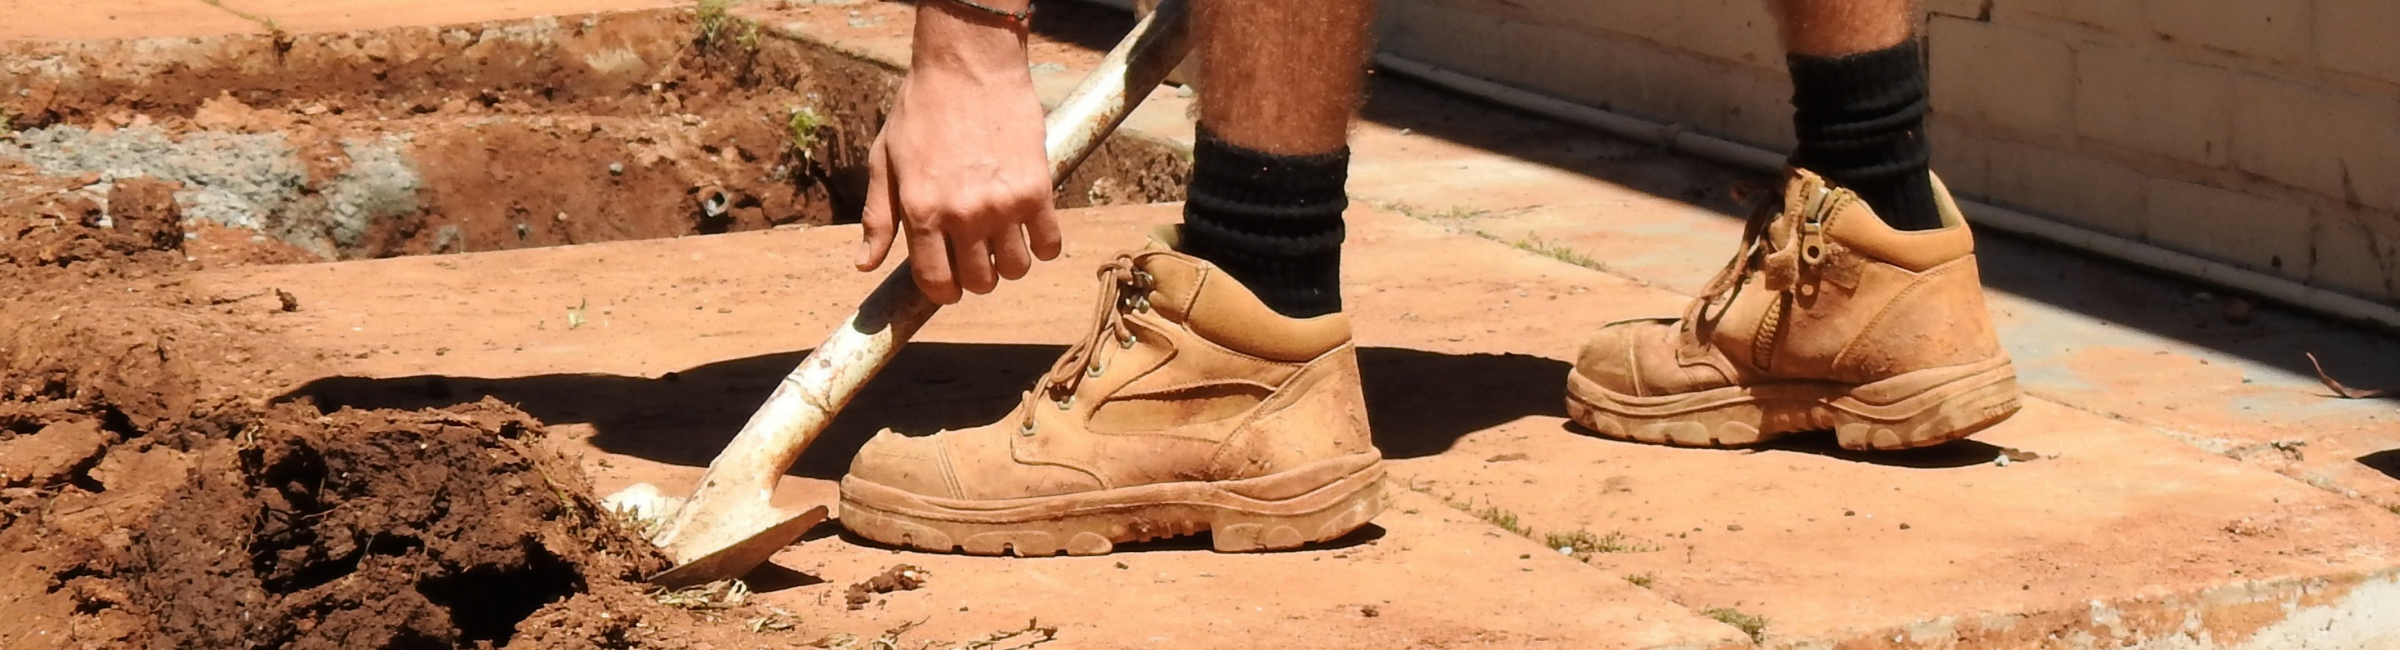 Close up photo of the work boots of a construction worker digging dirt